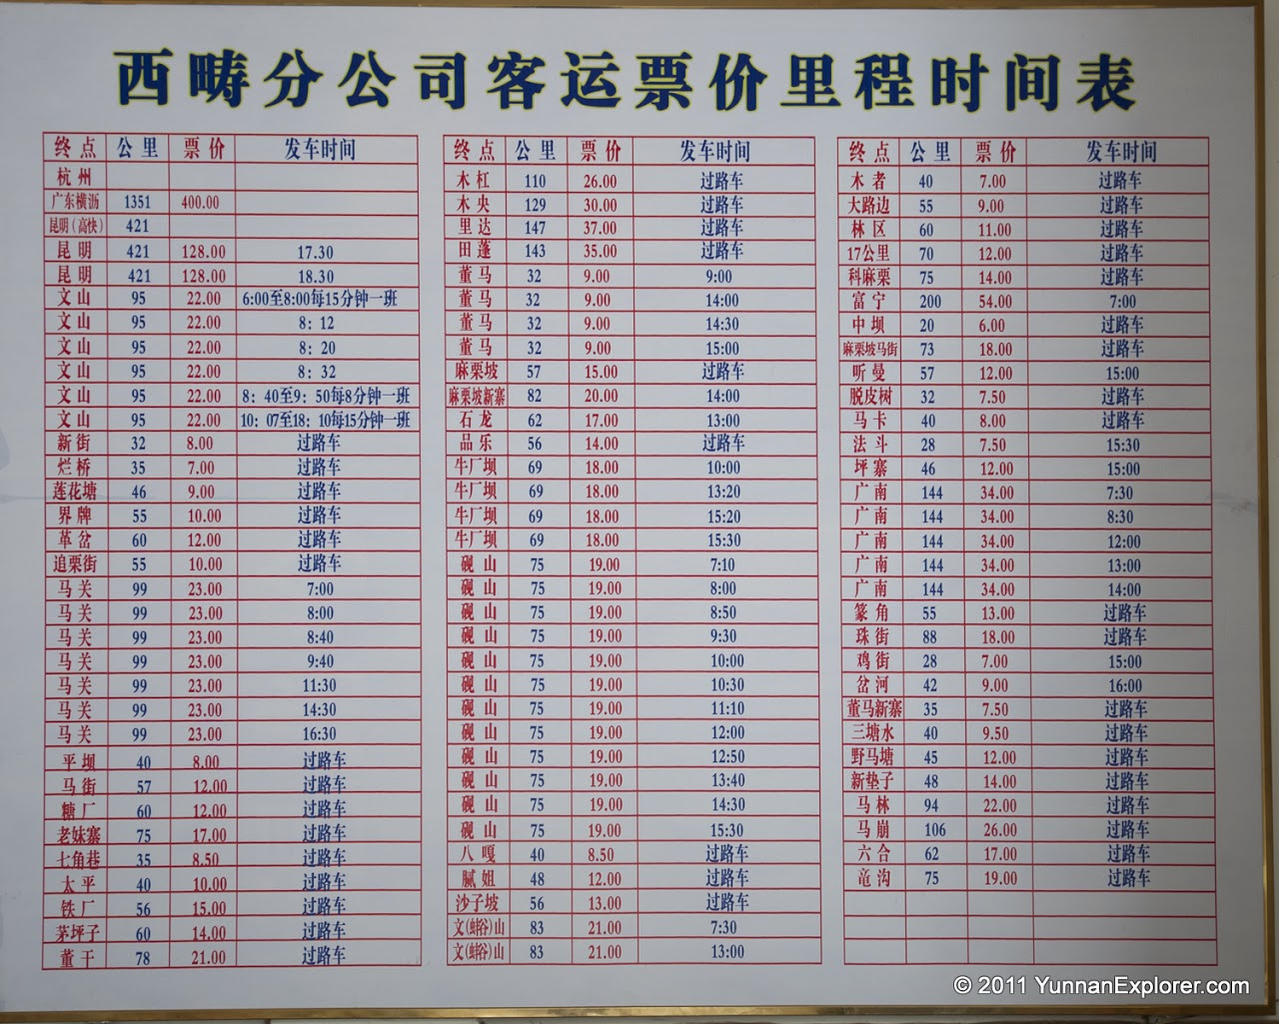 Picture: Connections to Wenshan, Malipo, Guangnan and Kunming. 